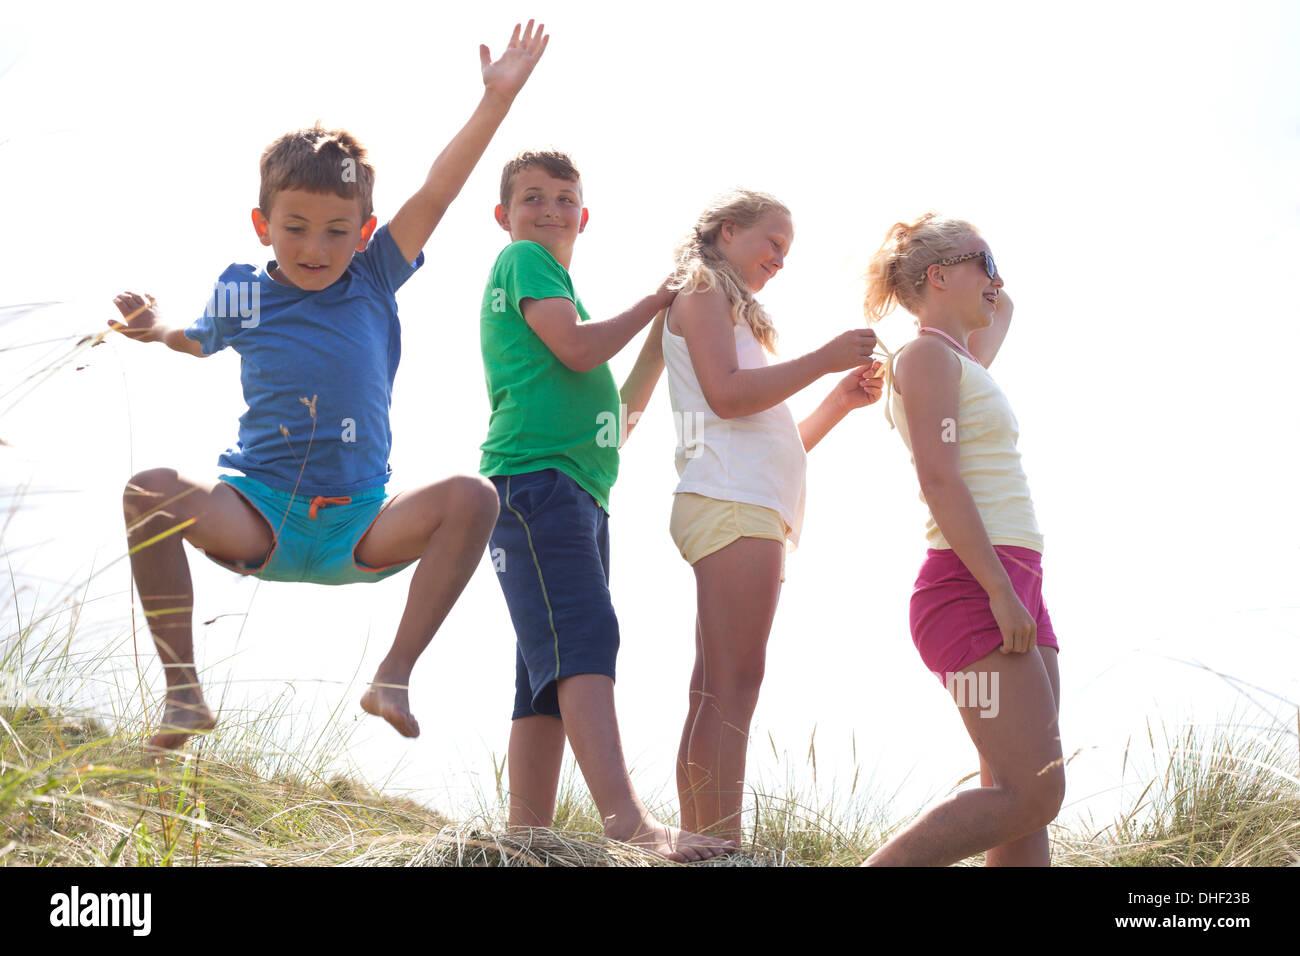 Four friends on dunes, one boy jumping, Wales, UK Stock Photo